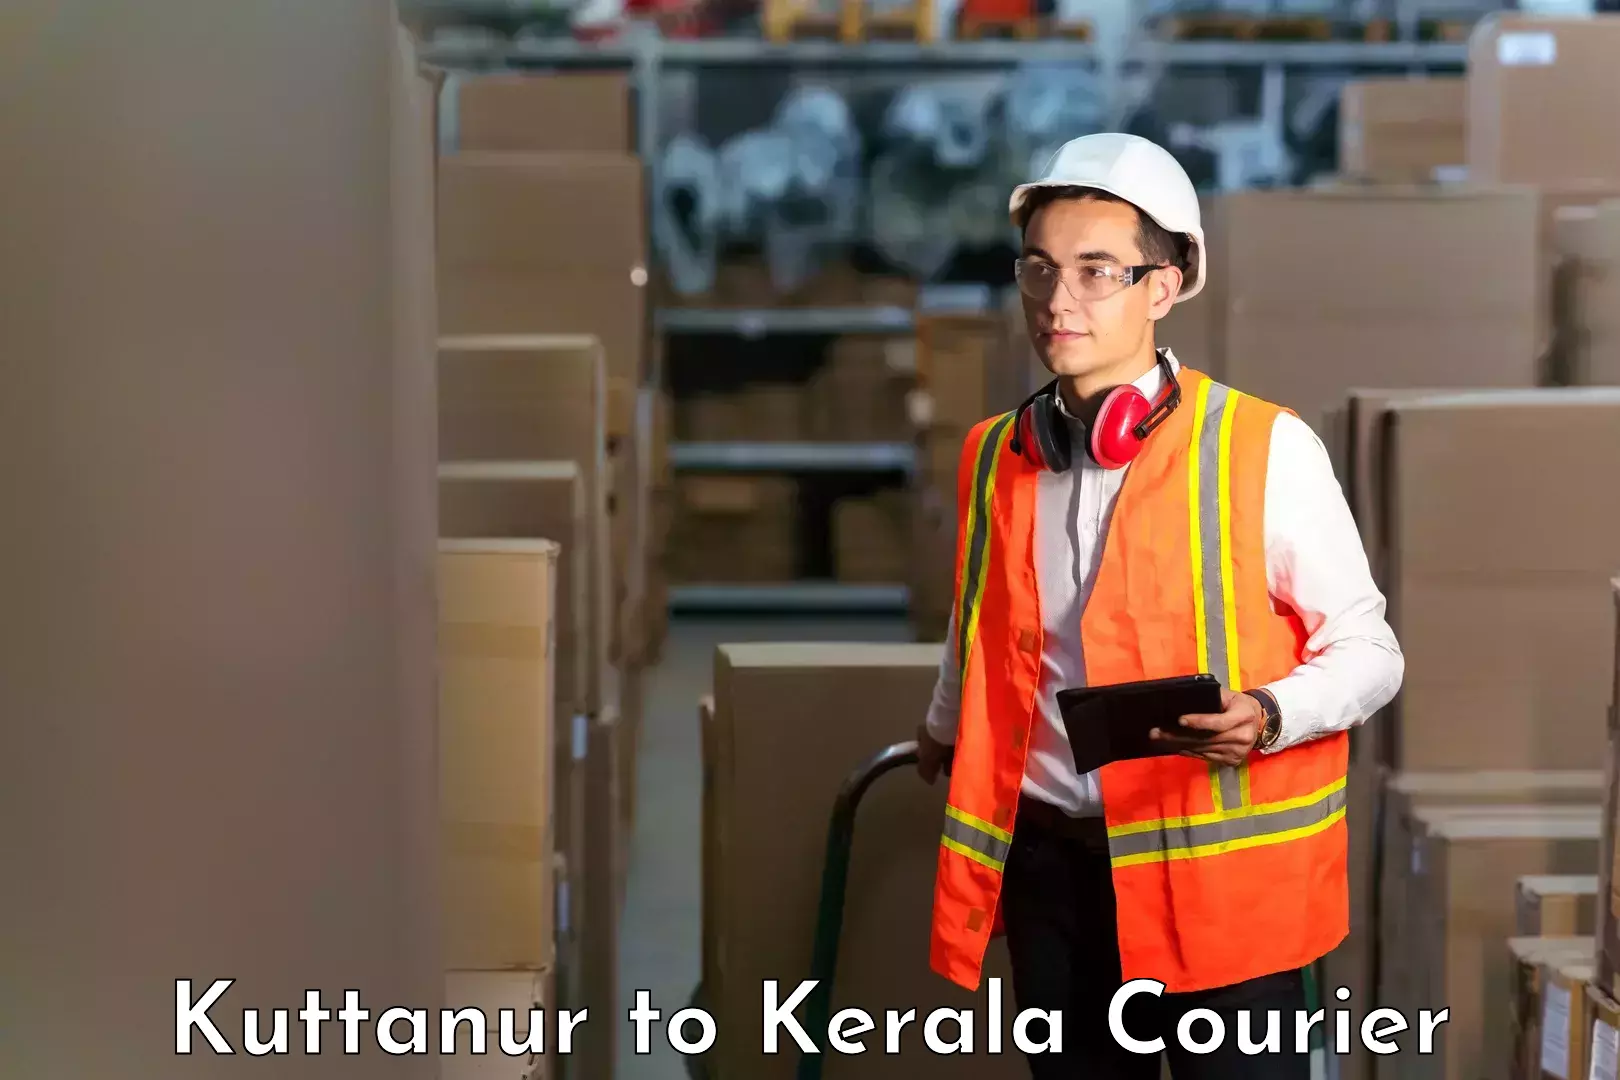 Courier service partnerships in Kuttanur to Kilimanoor